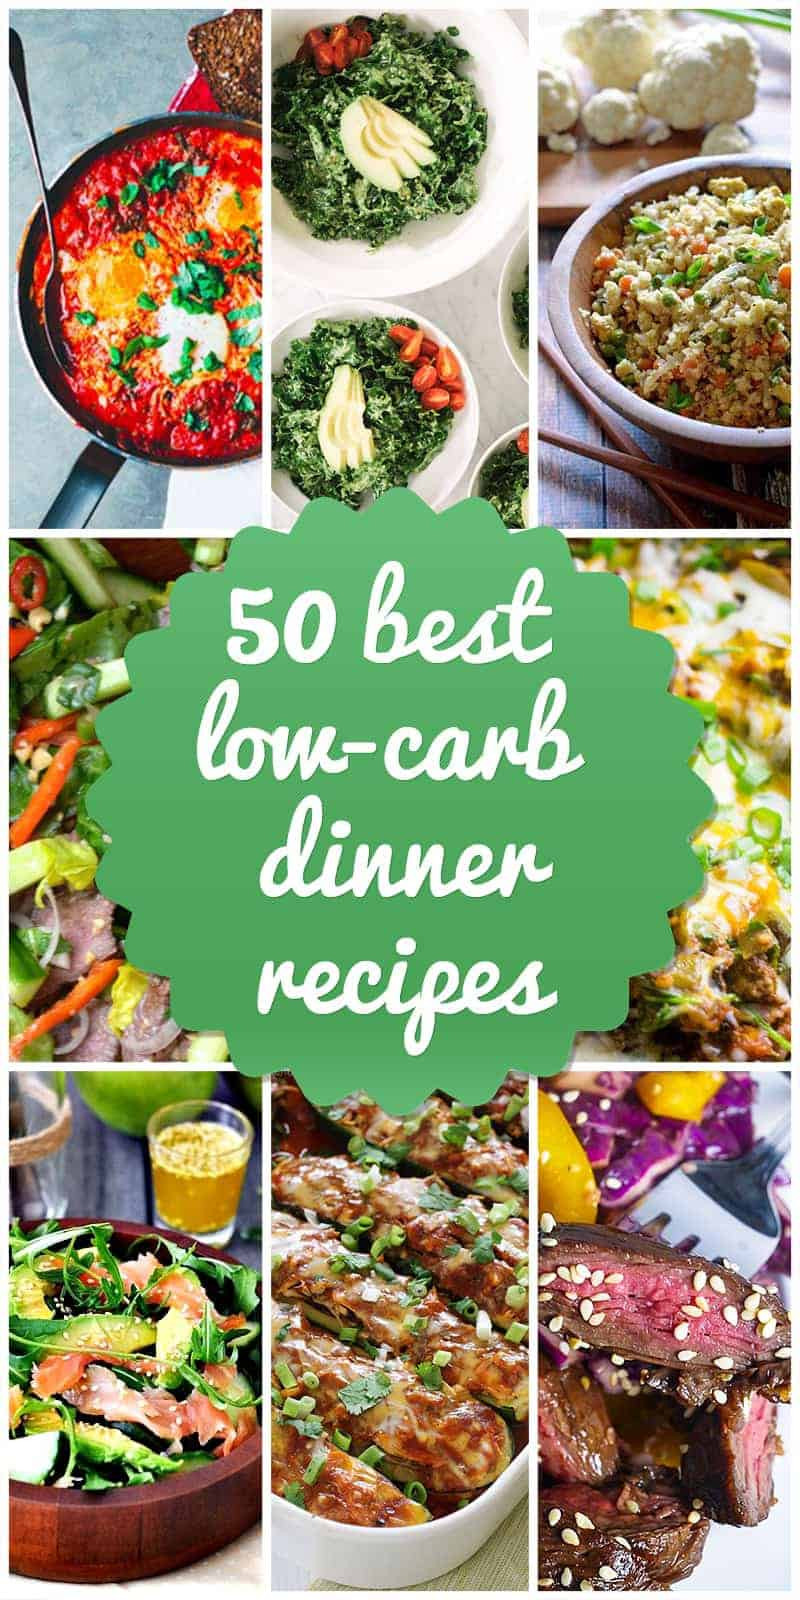 Best Low Carb Dinner Recipes New 50 Best Low Carb Dinners Recipes and Ideas